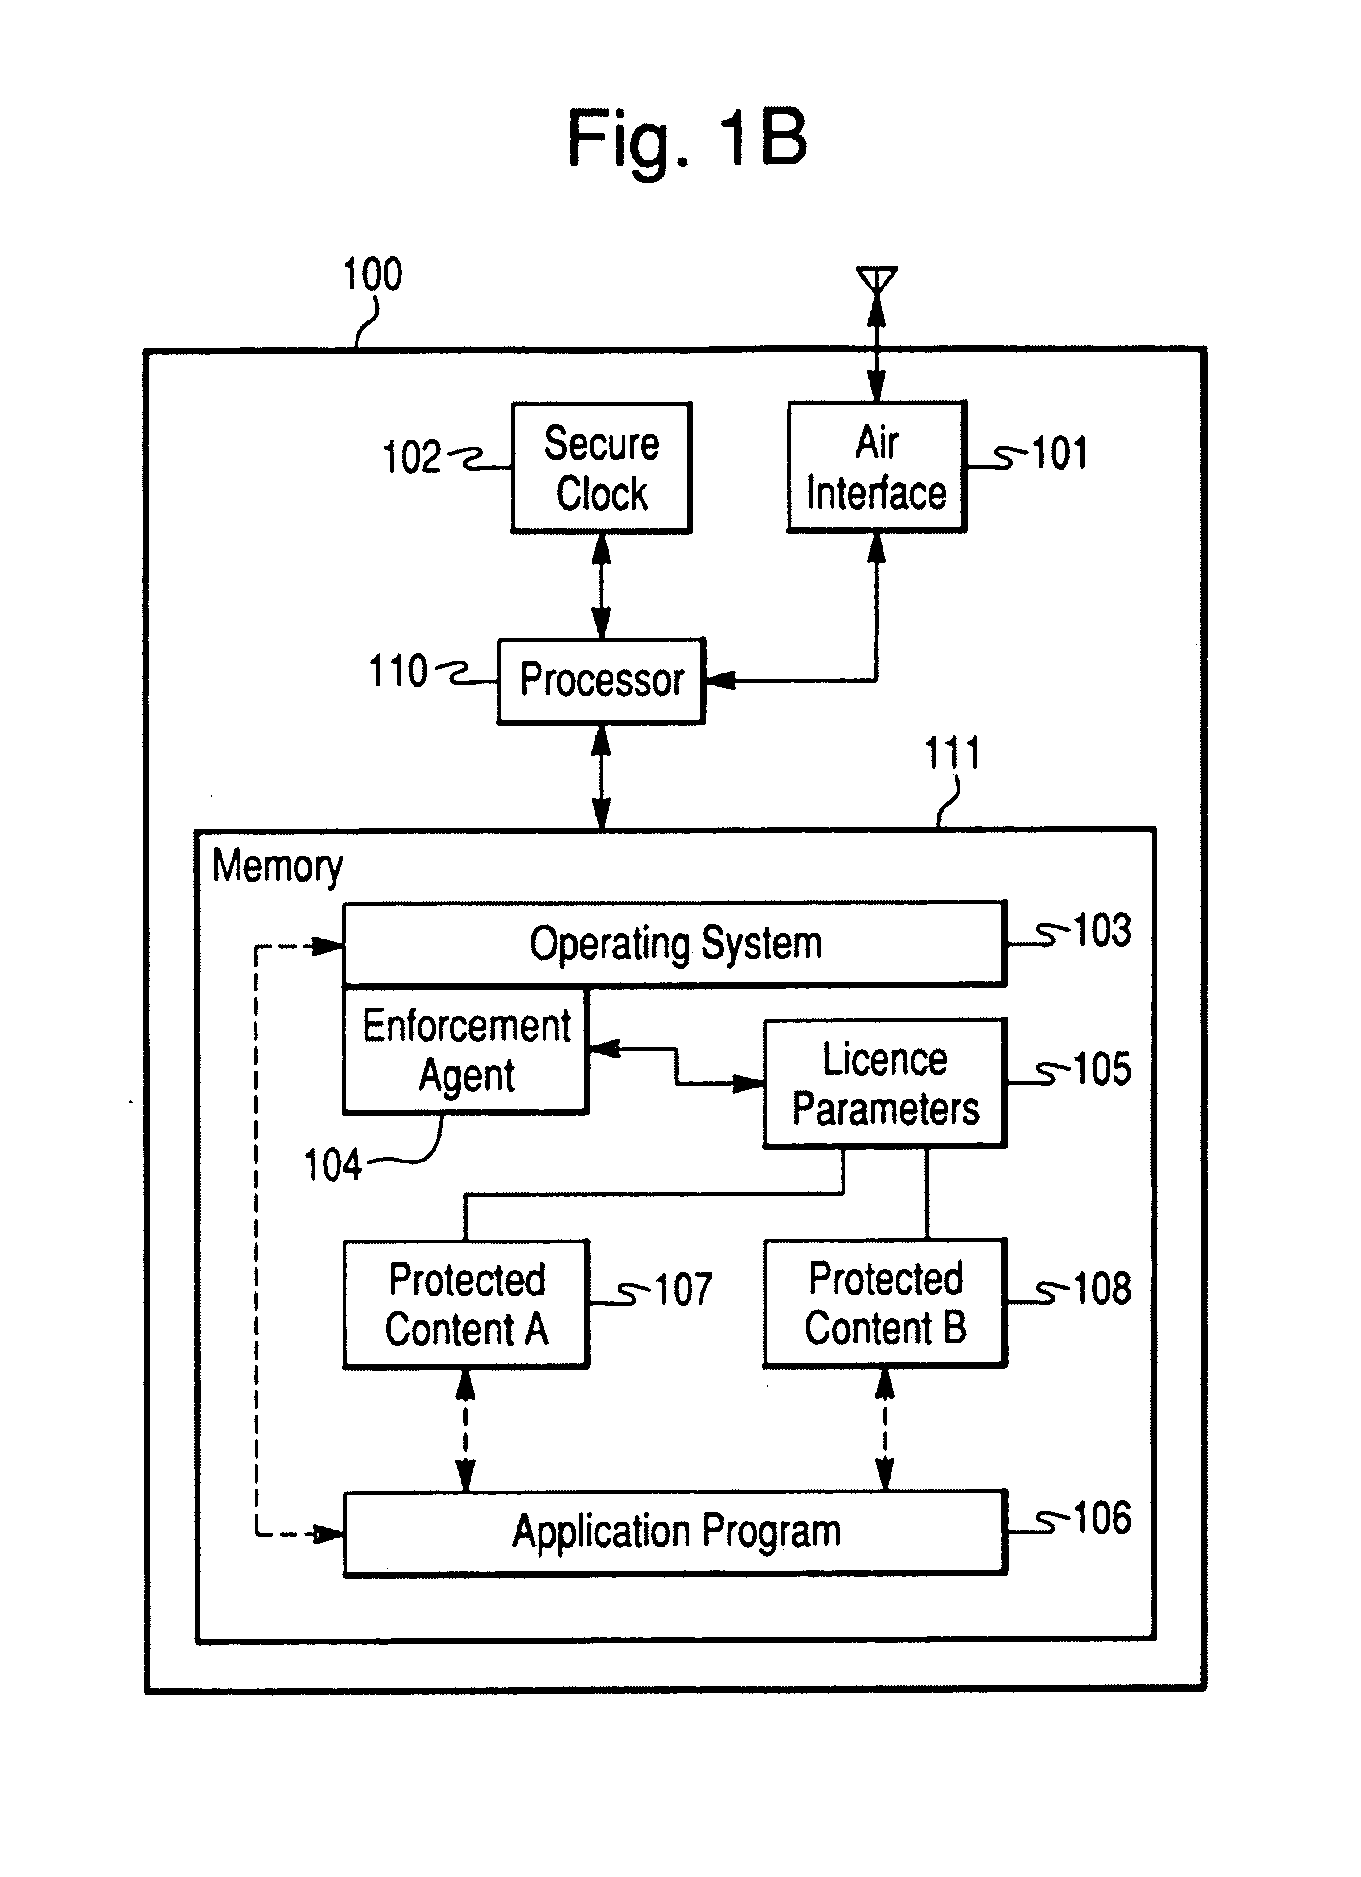 Method and apparatus for managing policies for time-based licenses on mobile devices